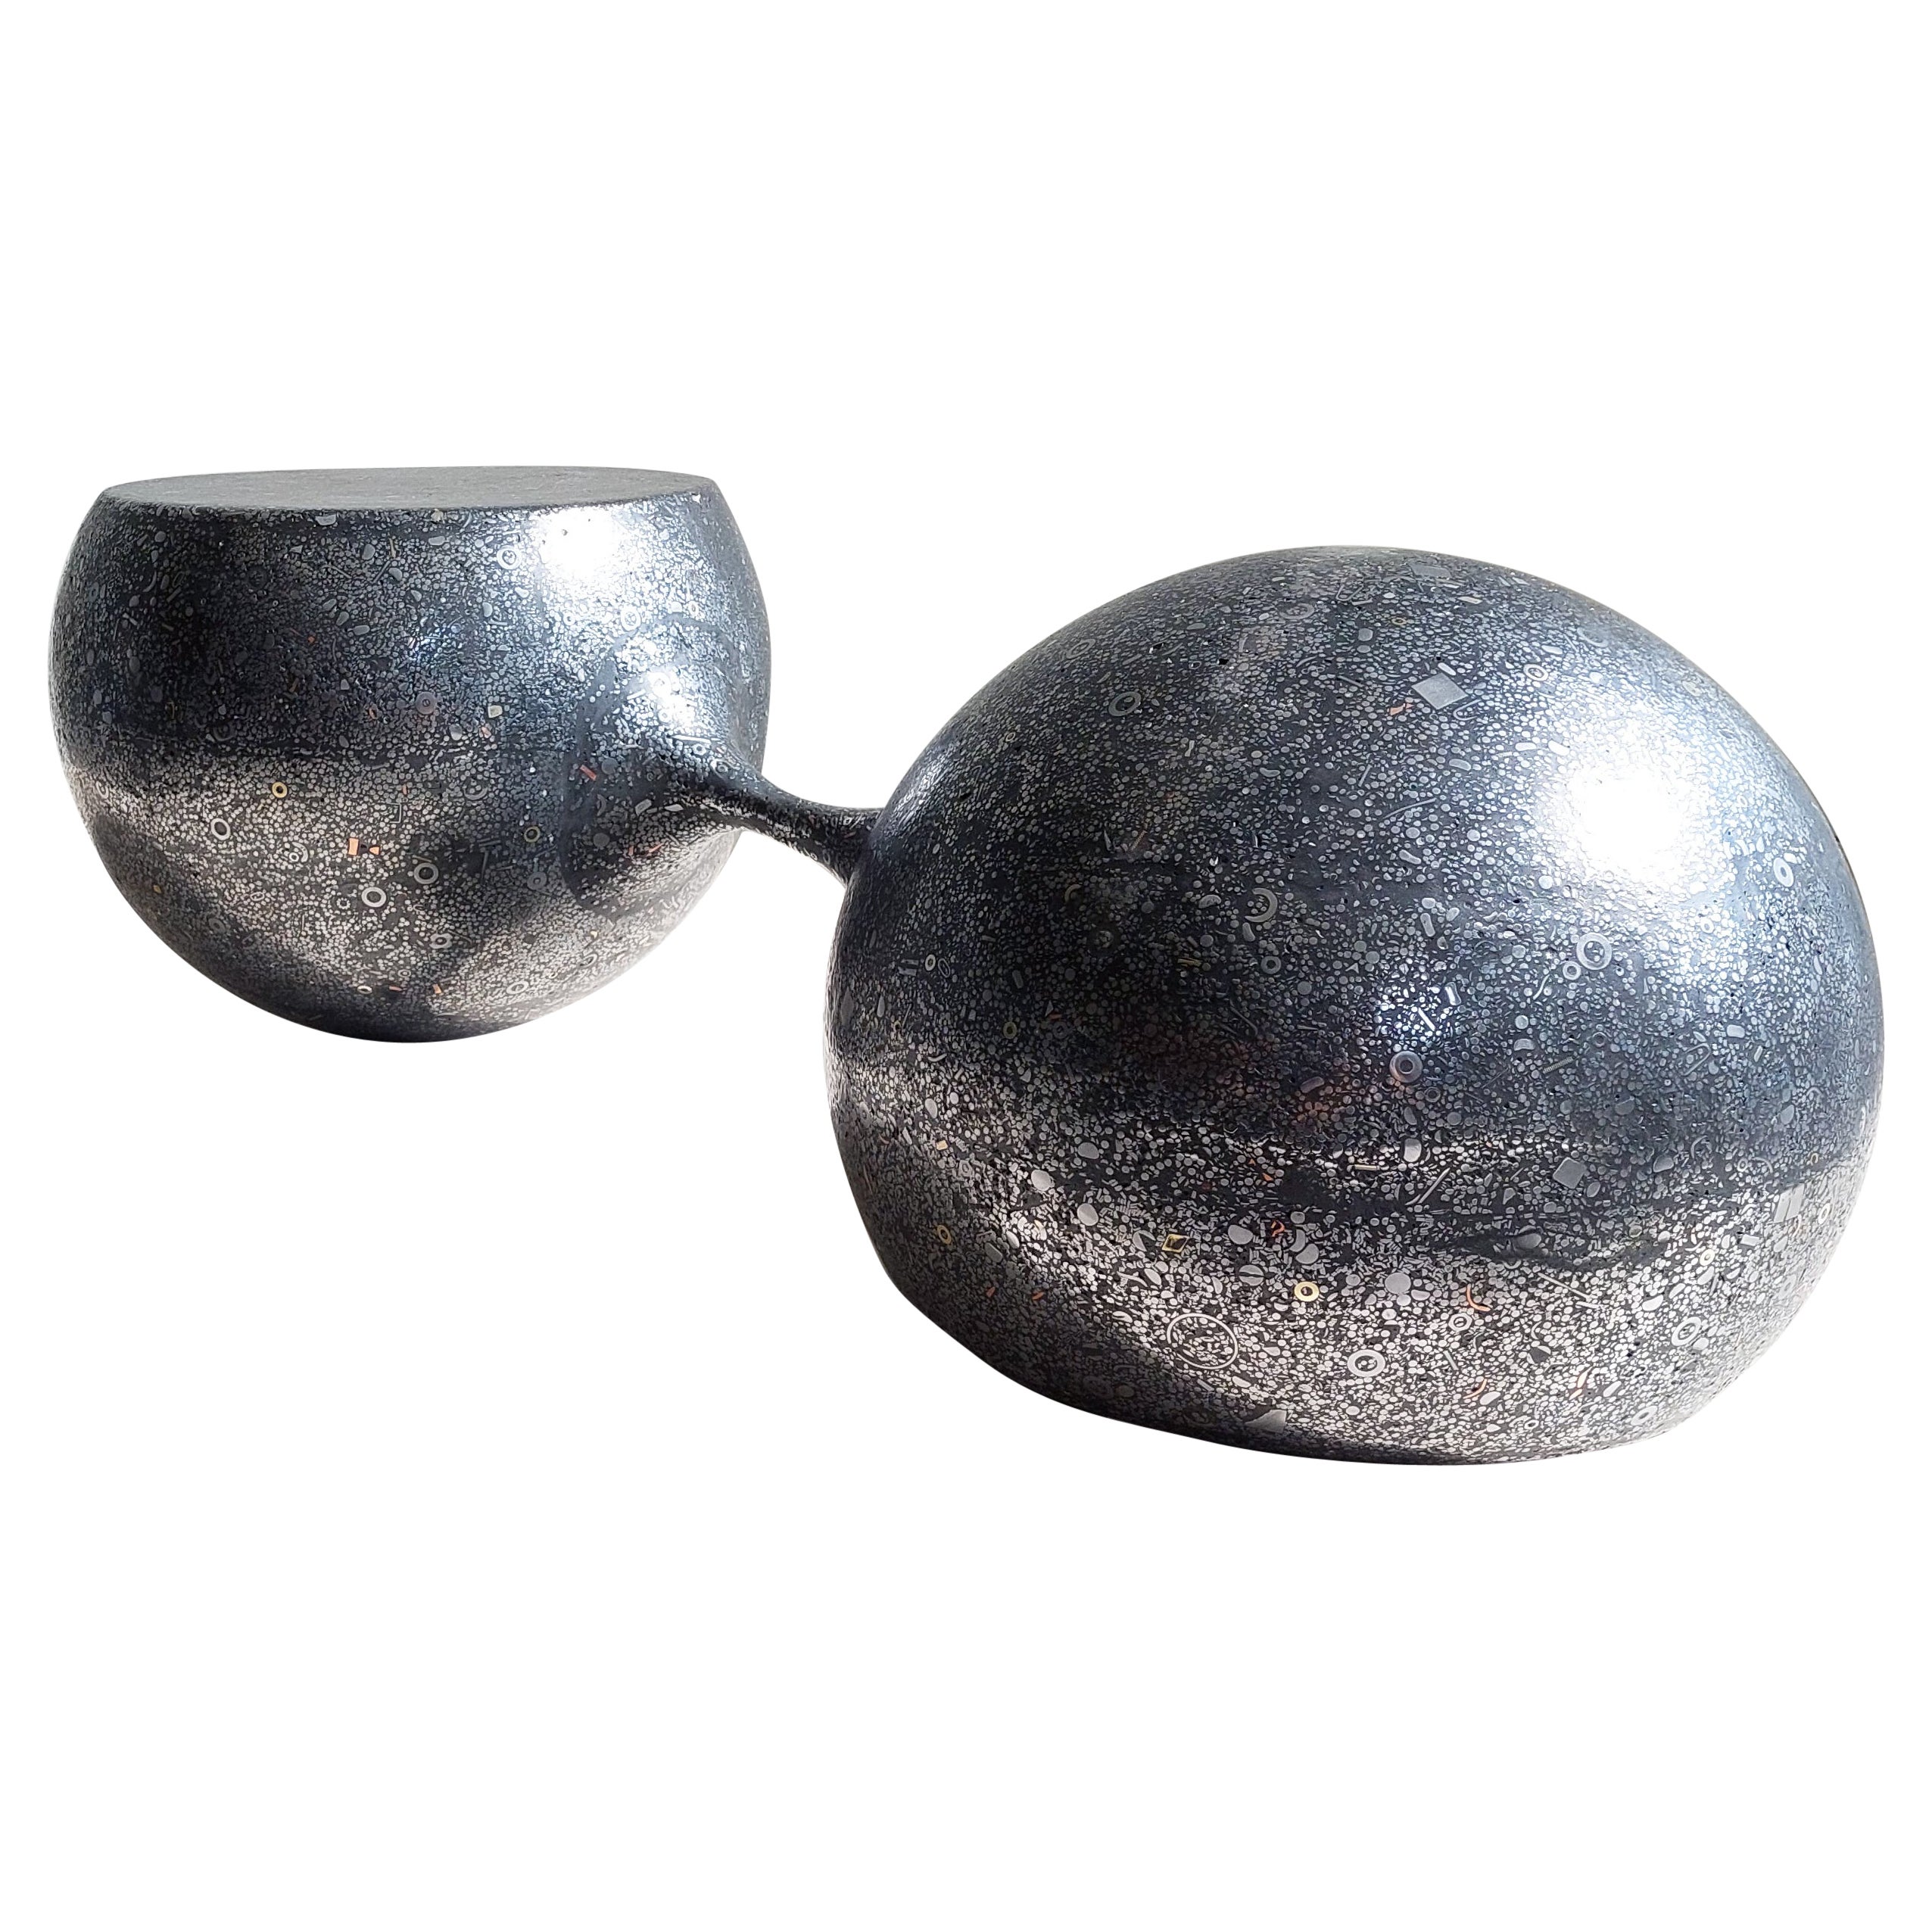 “DUMBELL” sculptural coffee table / sculpture / object /

Two metal spheres seemingly flow like mercury into each other
Molded from a self developed metal-based material: “Industrial fossil”.
Consisting mostly of metal, strengthened by a small